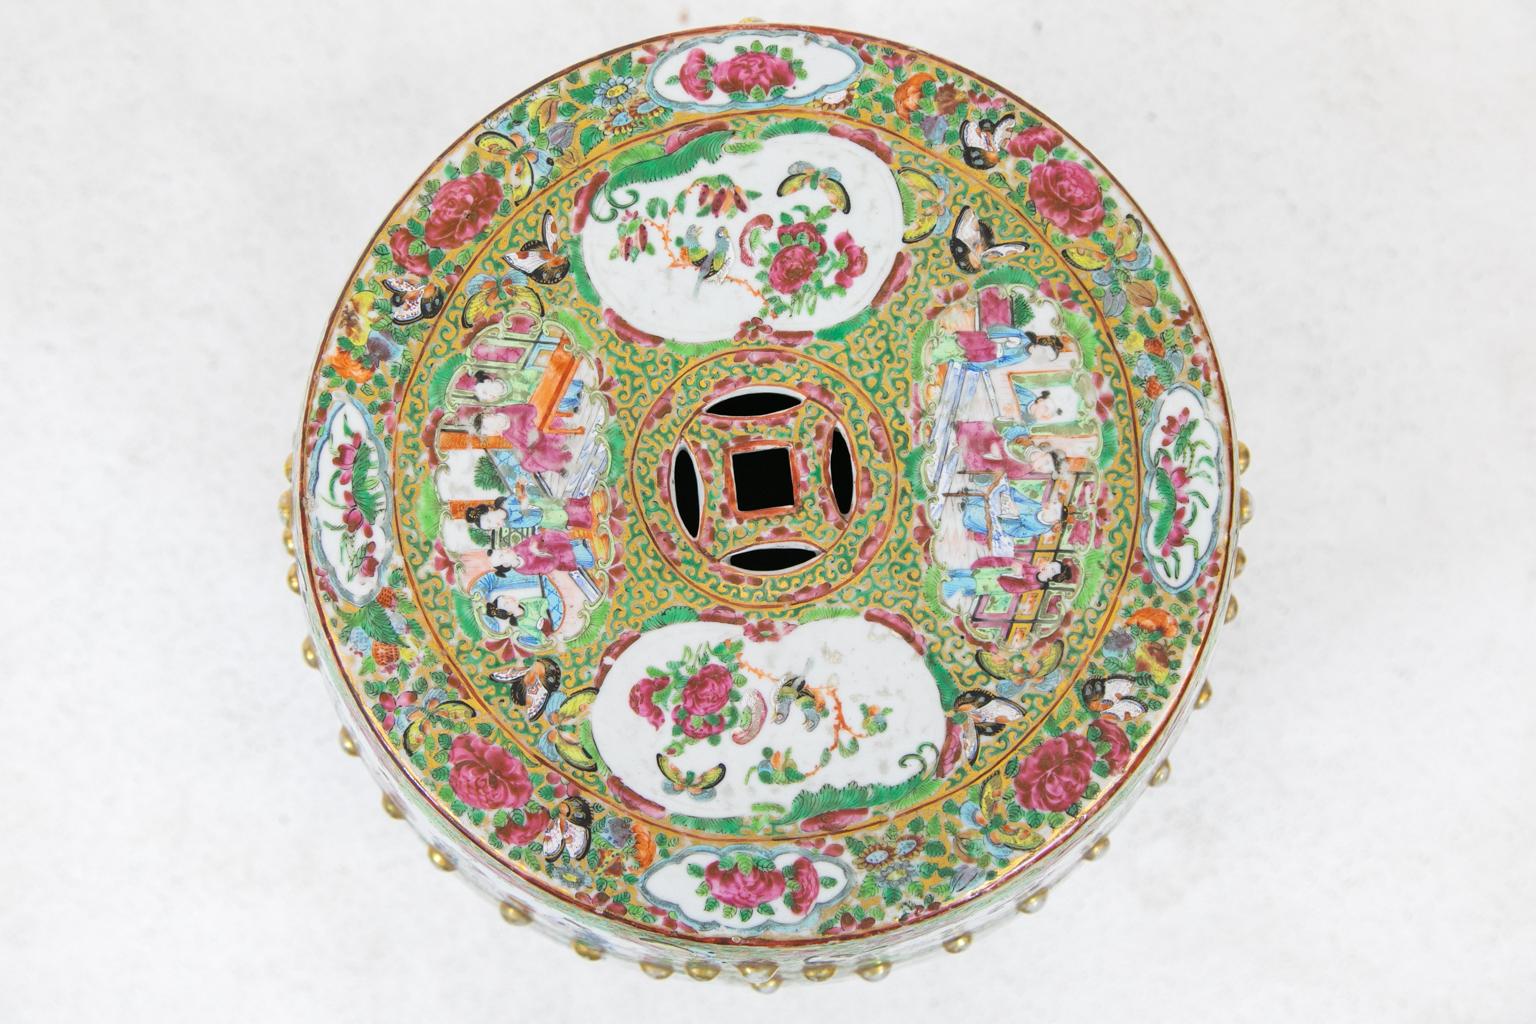 Rose Mandarin garden seat, has mandarin figures painted over all with birds, butterflies, and flowers in the top four cartouches. The middle area is painted with two large central panels featuring Mandarin figures in a palace. Ladies are depicted